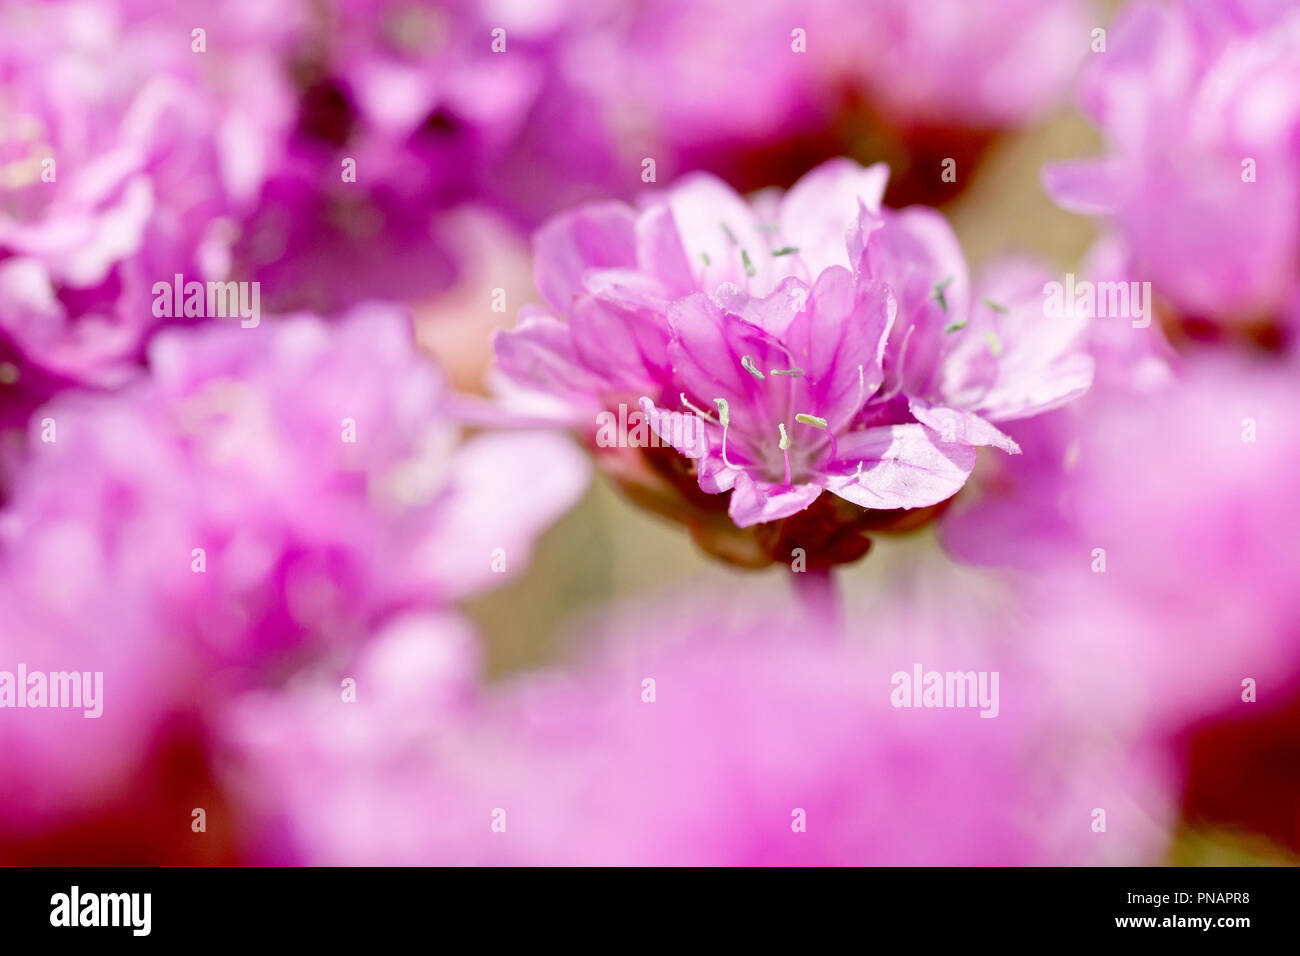 Thrift or Sea Pink (armeria maritima), close up of a single flower out of many with low depth of field. Stock Photo